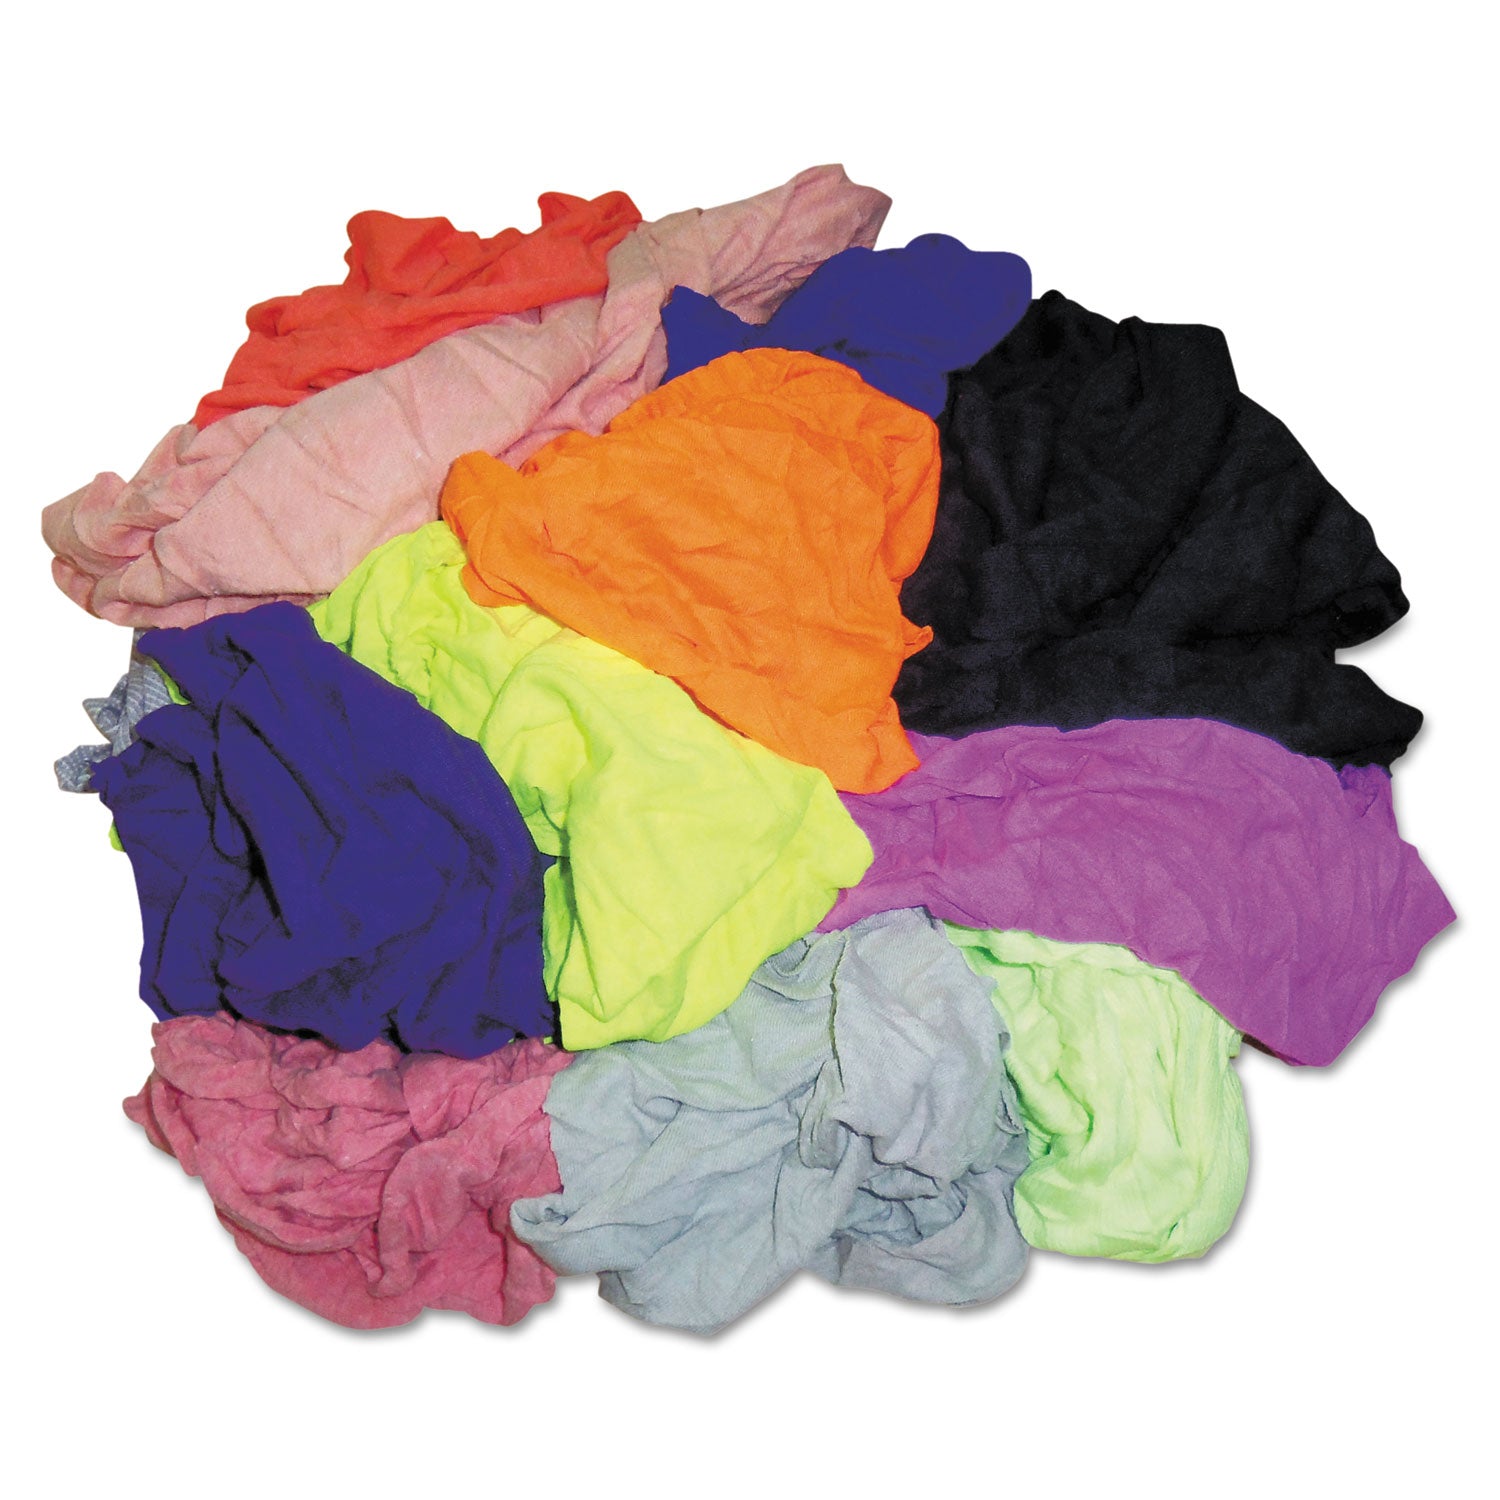 New Colored Knit Polo T-Shirt Rags, Assorted Colors, 10 Pounds/Carton - 